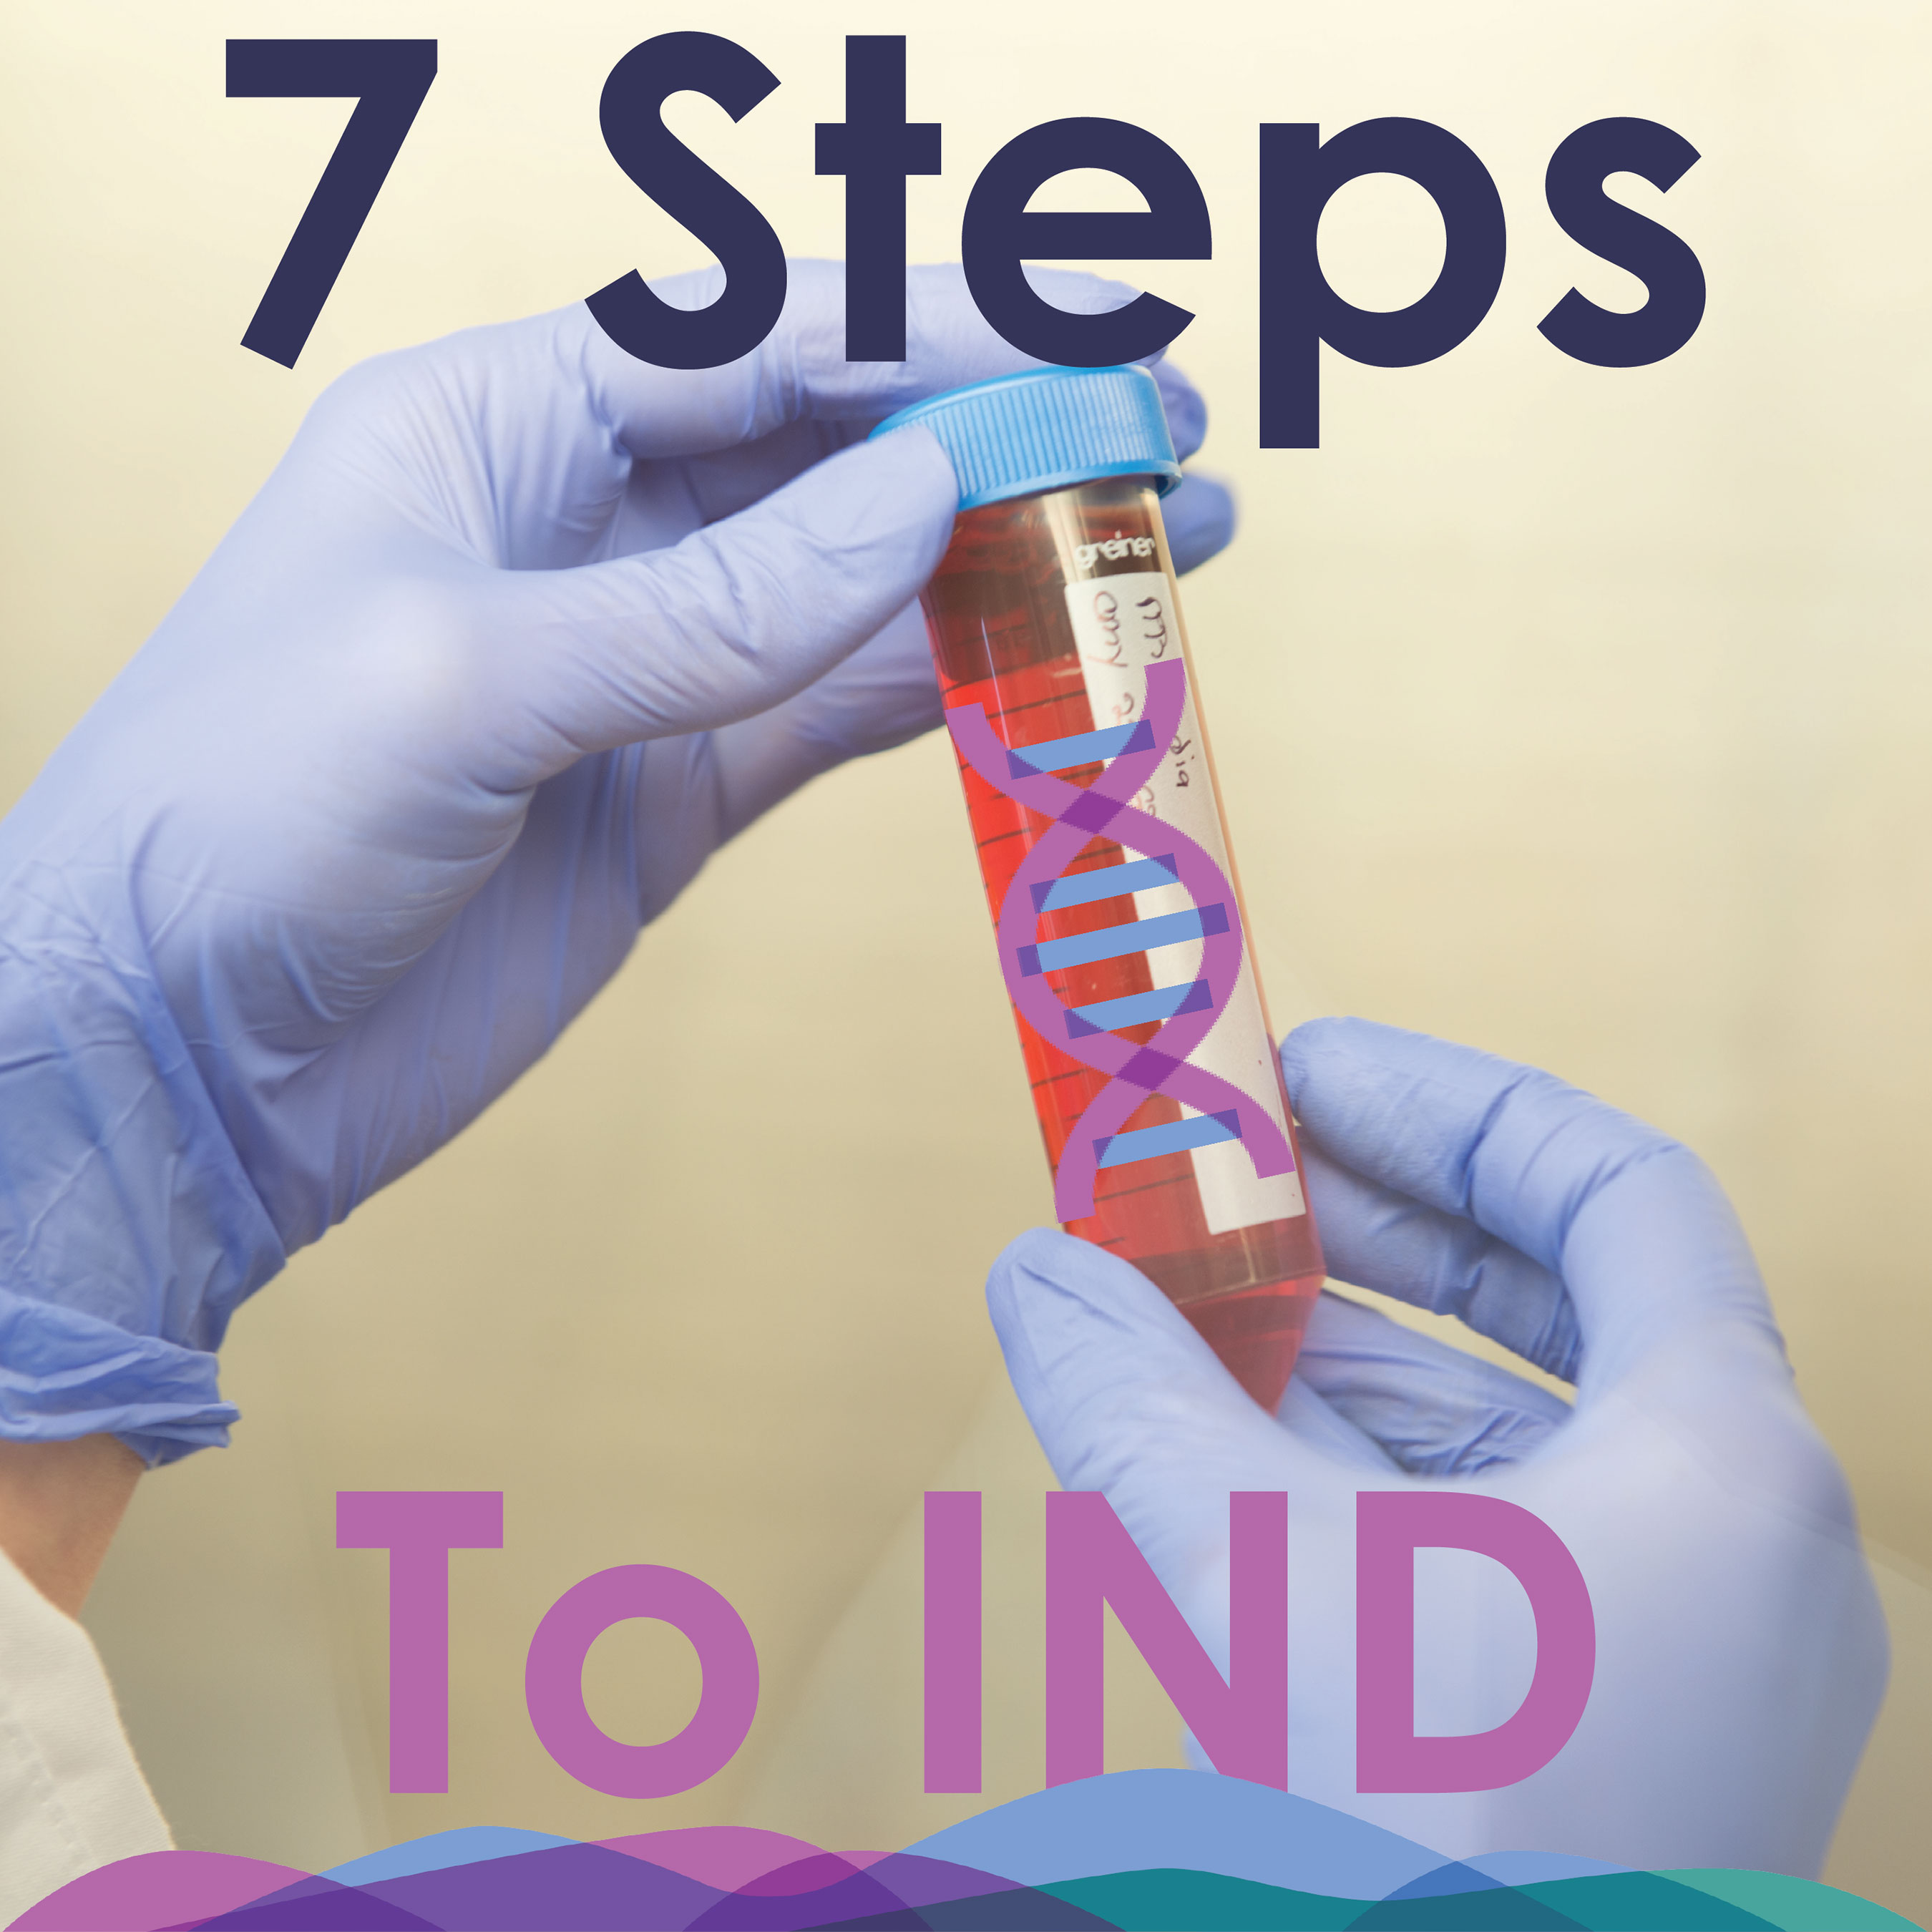 7 steps to IND